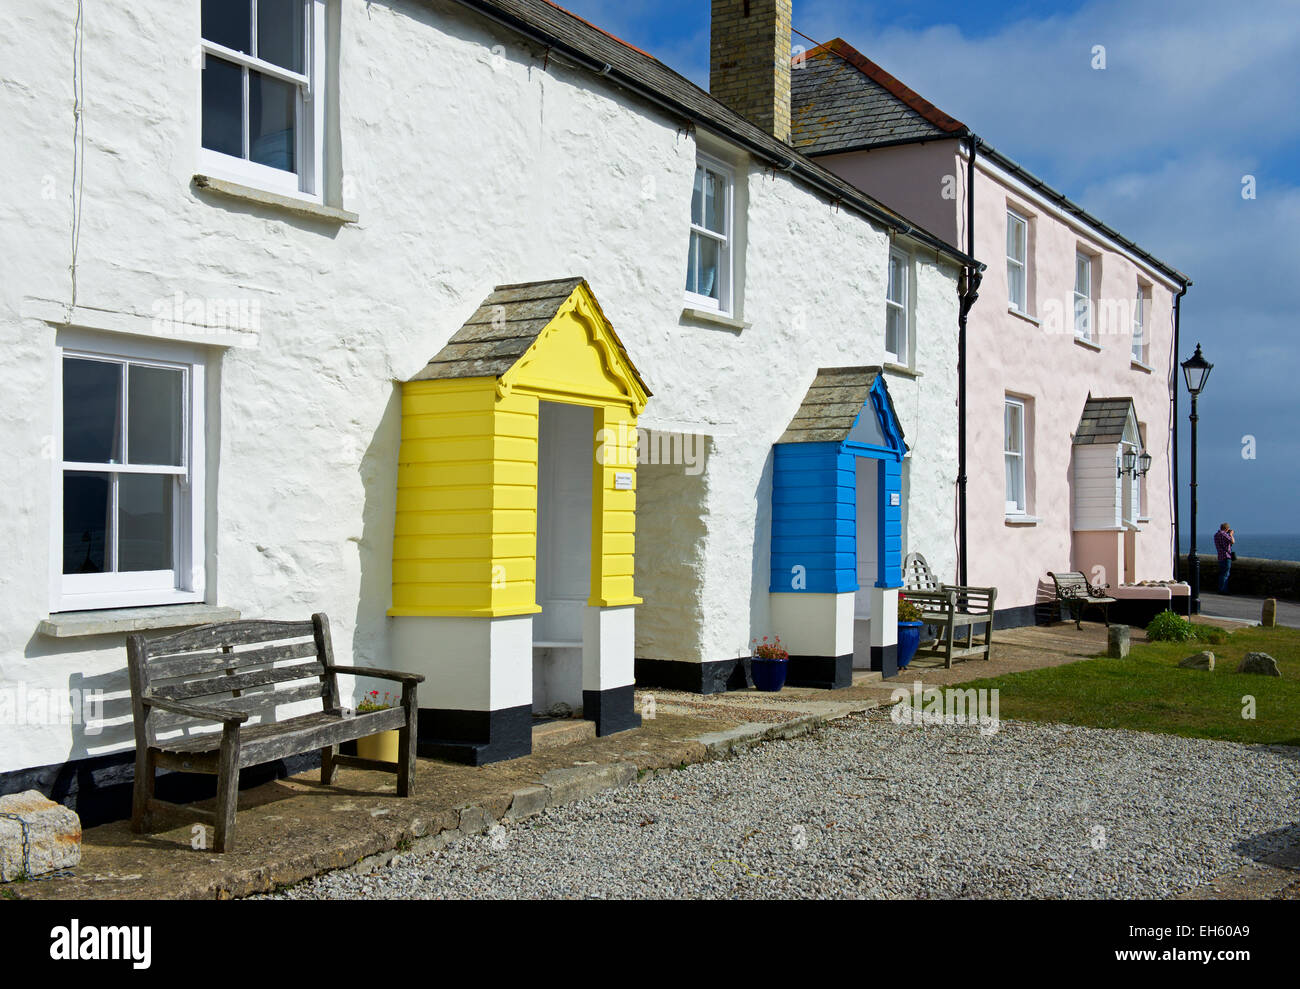 Cottages in Charlestown, Cornwall, England Regno Unito Foto Stock